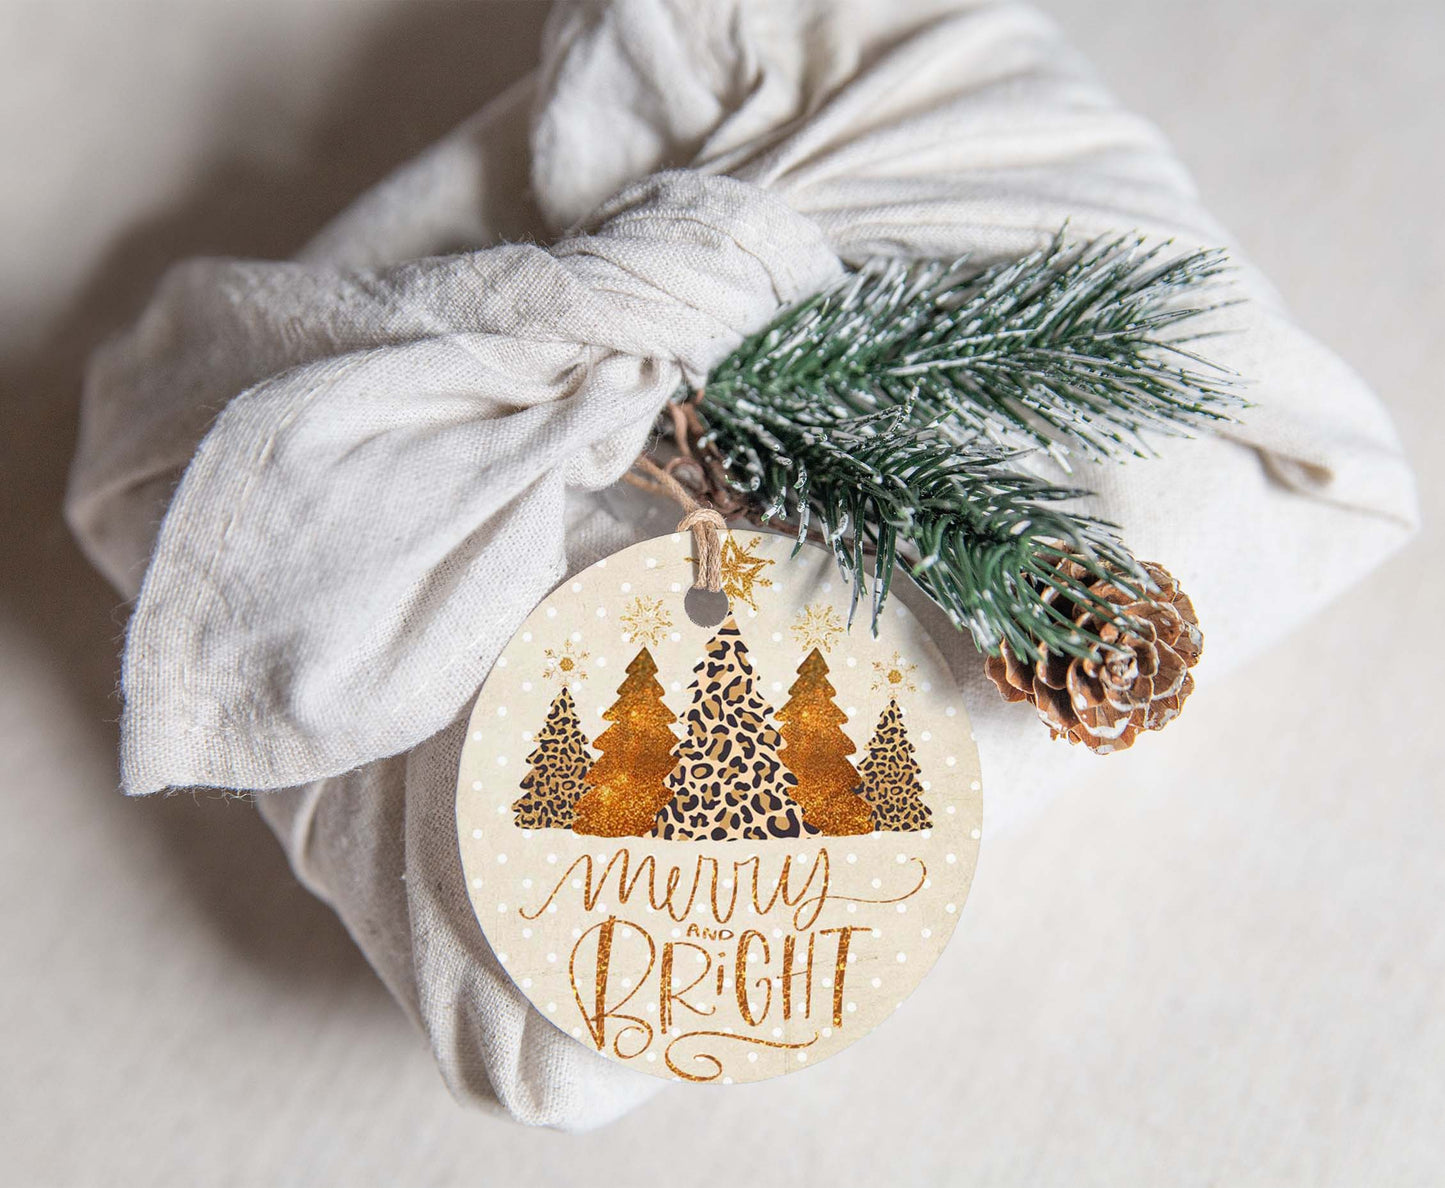 Merry and Bright tags 2"x2" | Christmas Pine Tree Tags - 112